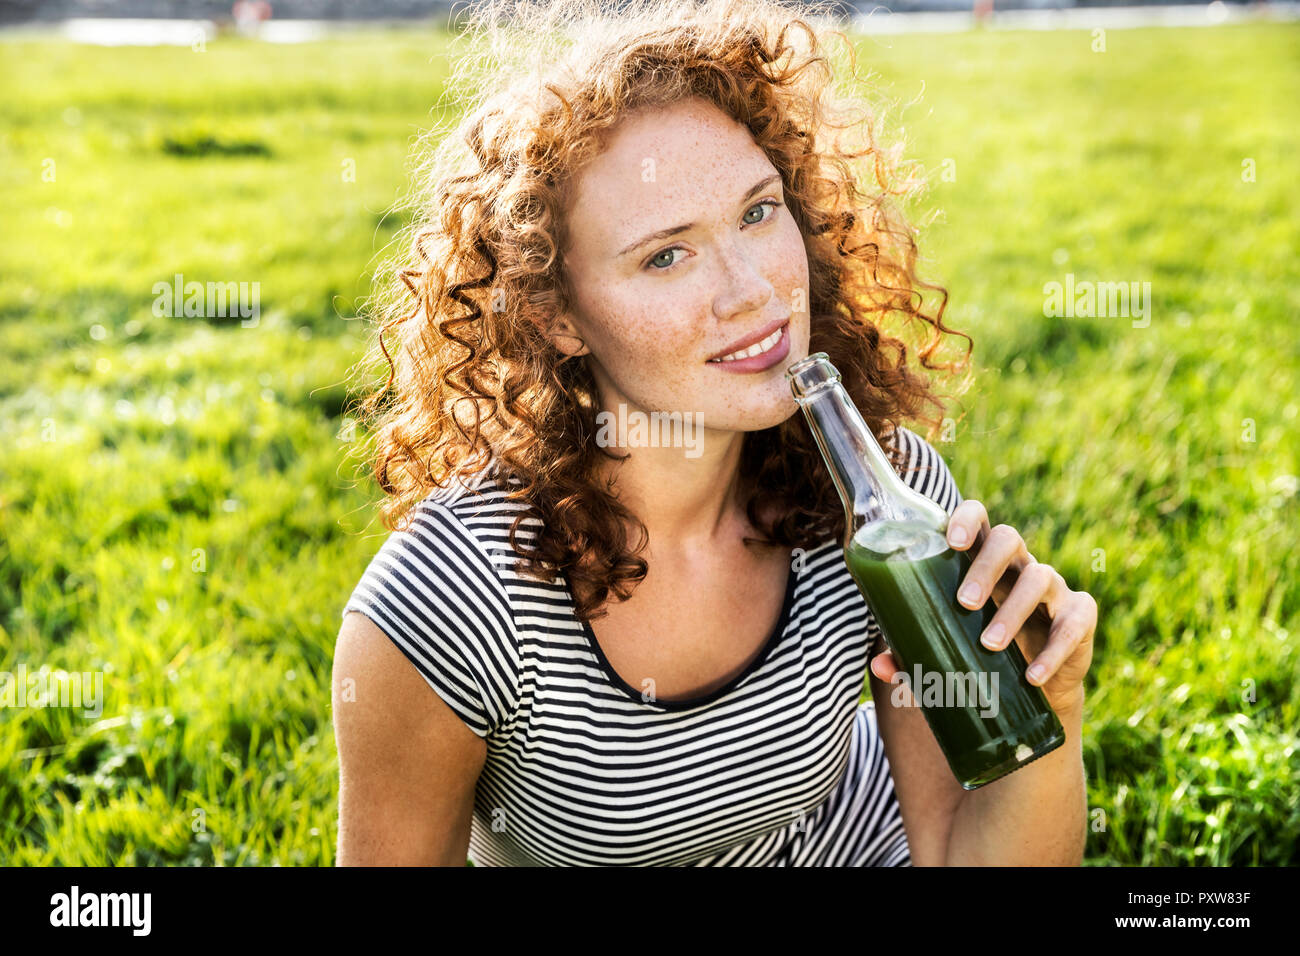 Portrait of redheaded young woman enjoying beverage Stock Photo